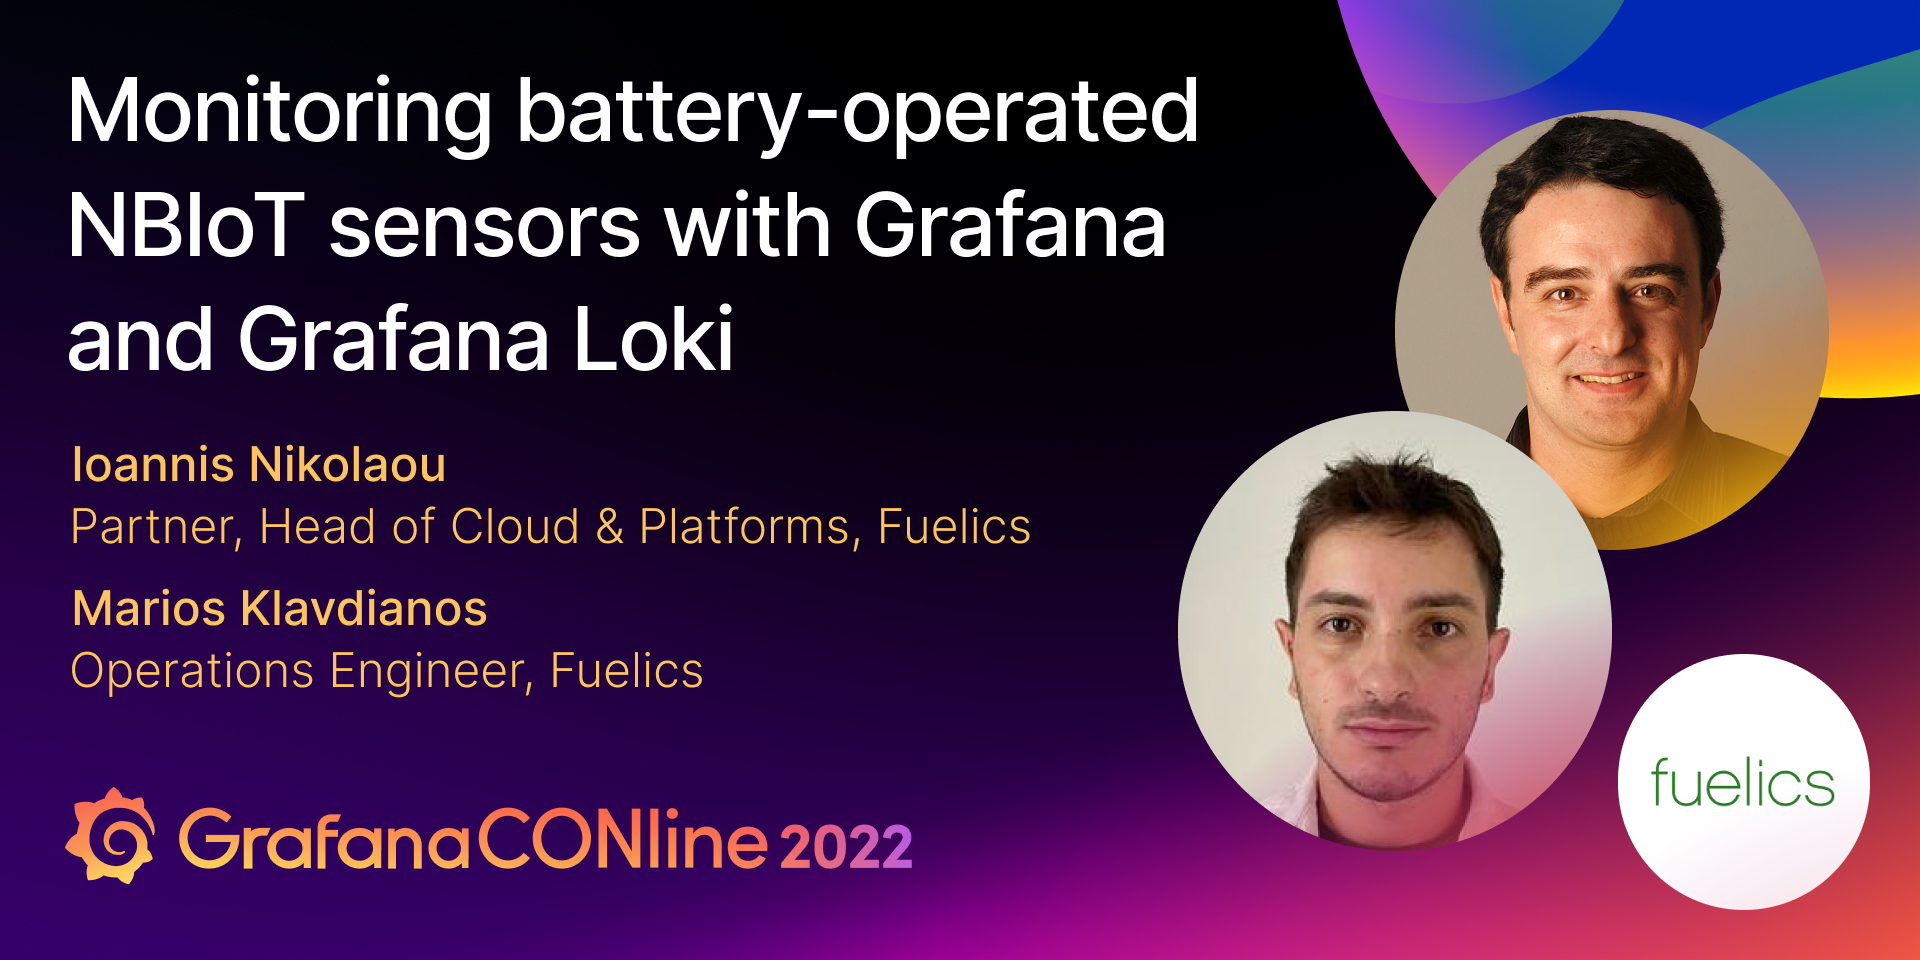 The duo from Fuelics joined more than 50 speakers at GrafanaCONline 2022.